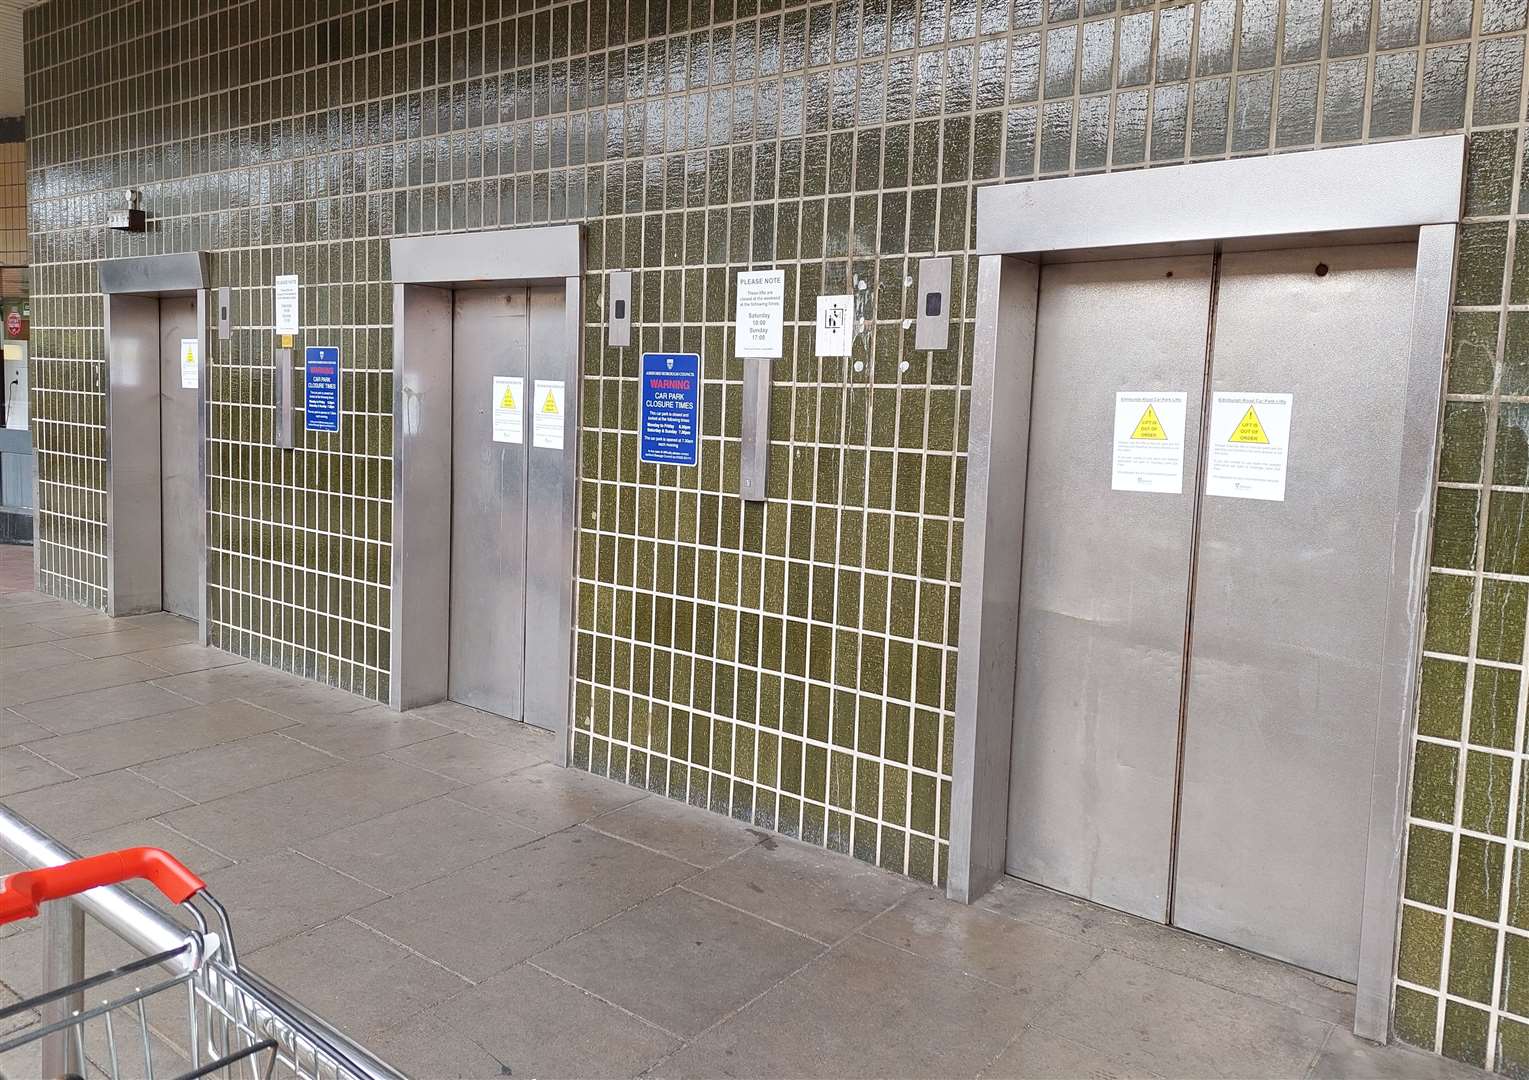 The lifts at Edinburgh Road car park are notoriously unreliable